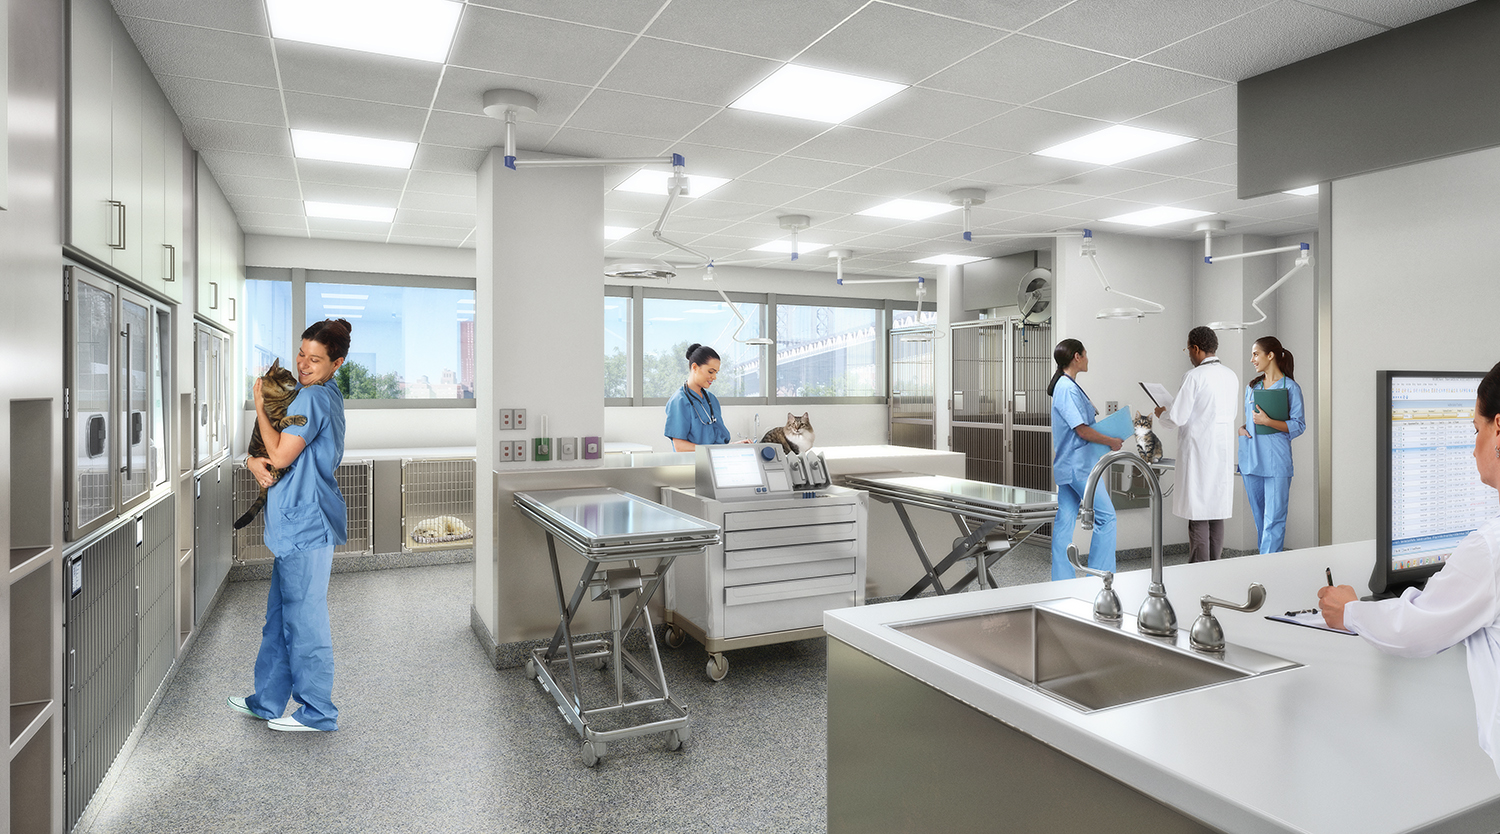 A rendering of the interior of a hospital.